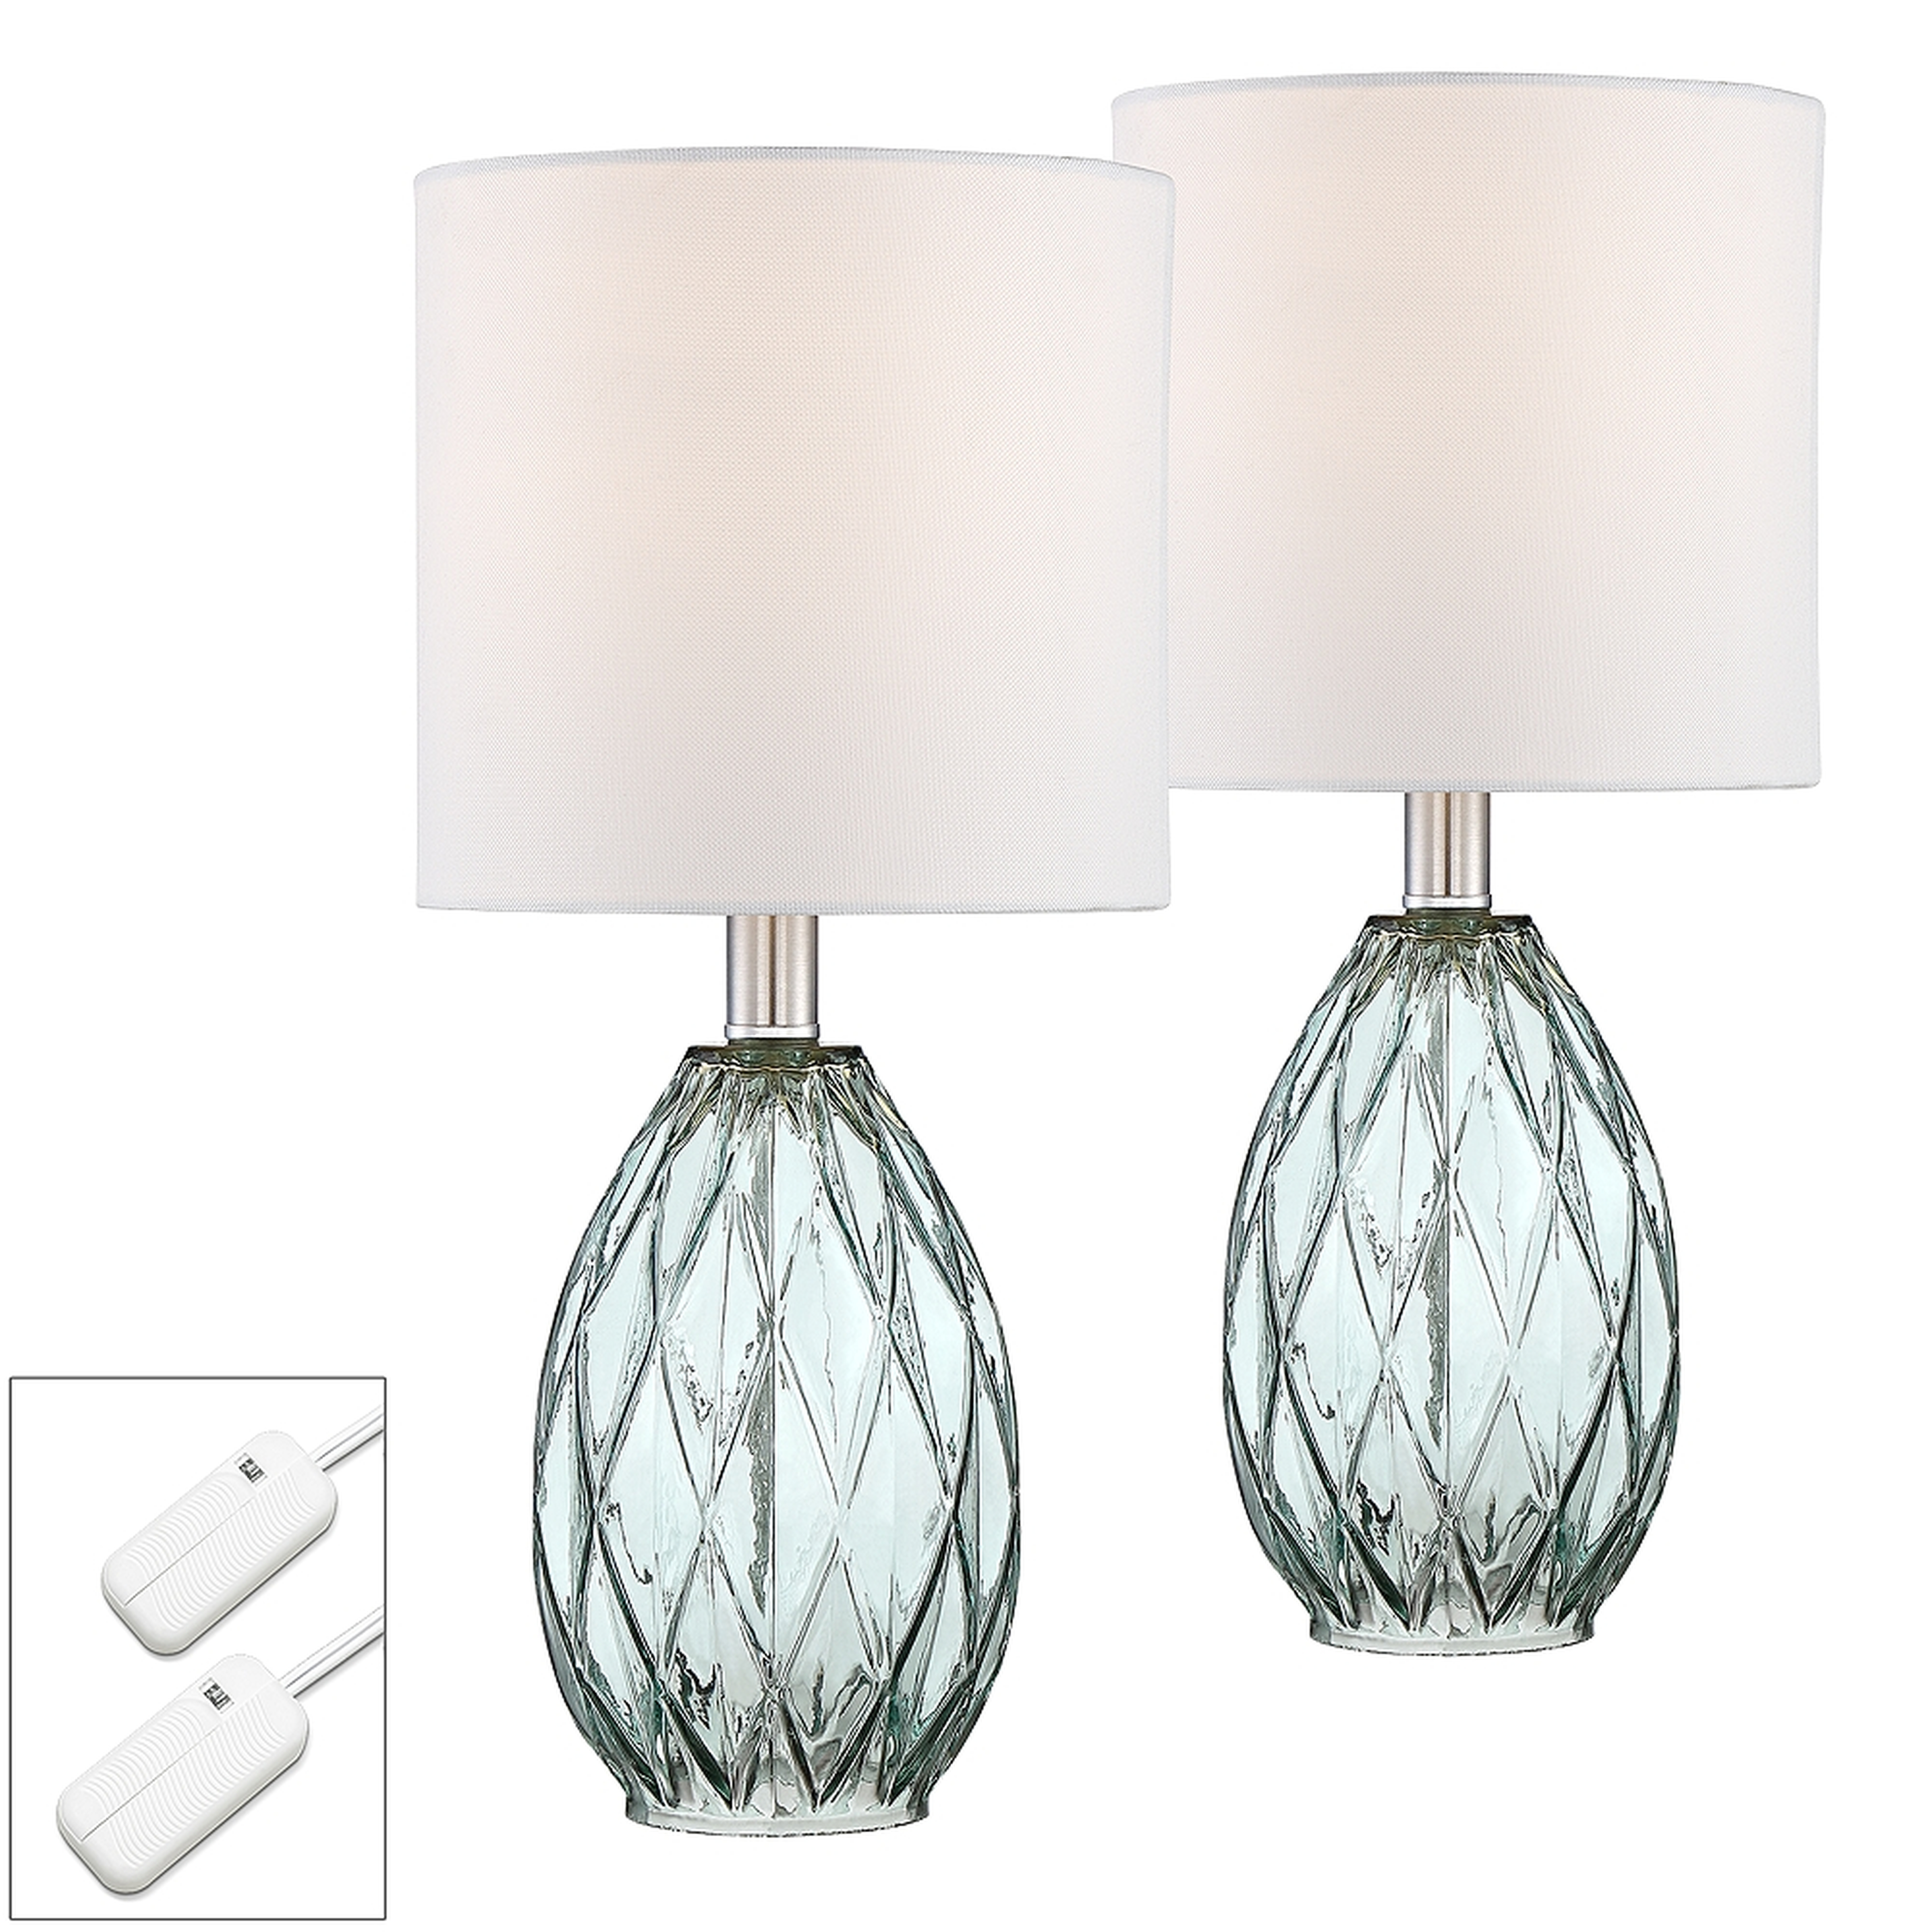 Rita Blue-Green Glass Accent Table Lamps Set of 2 with Dimmers - Style # 80P81 - Lamps Plus